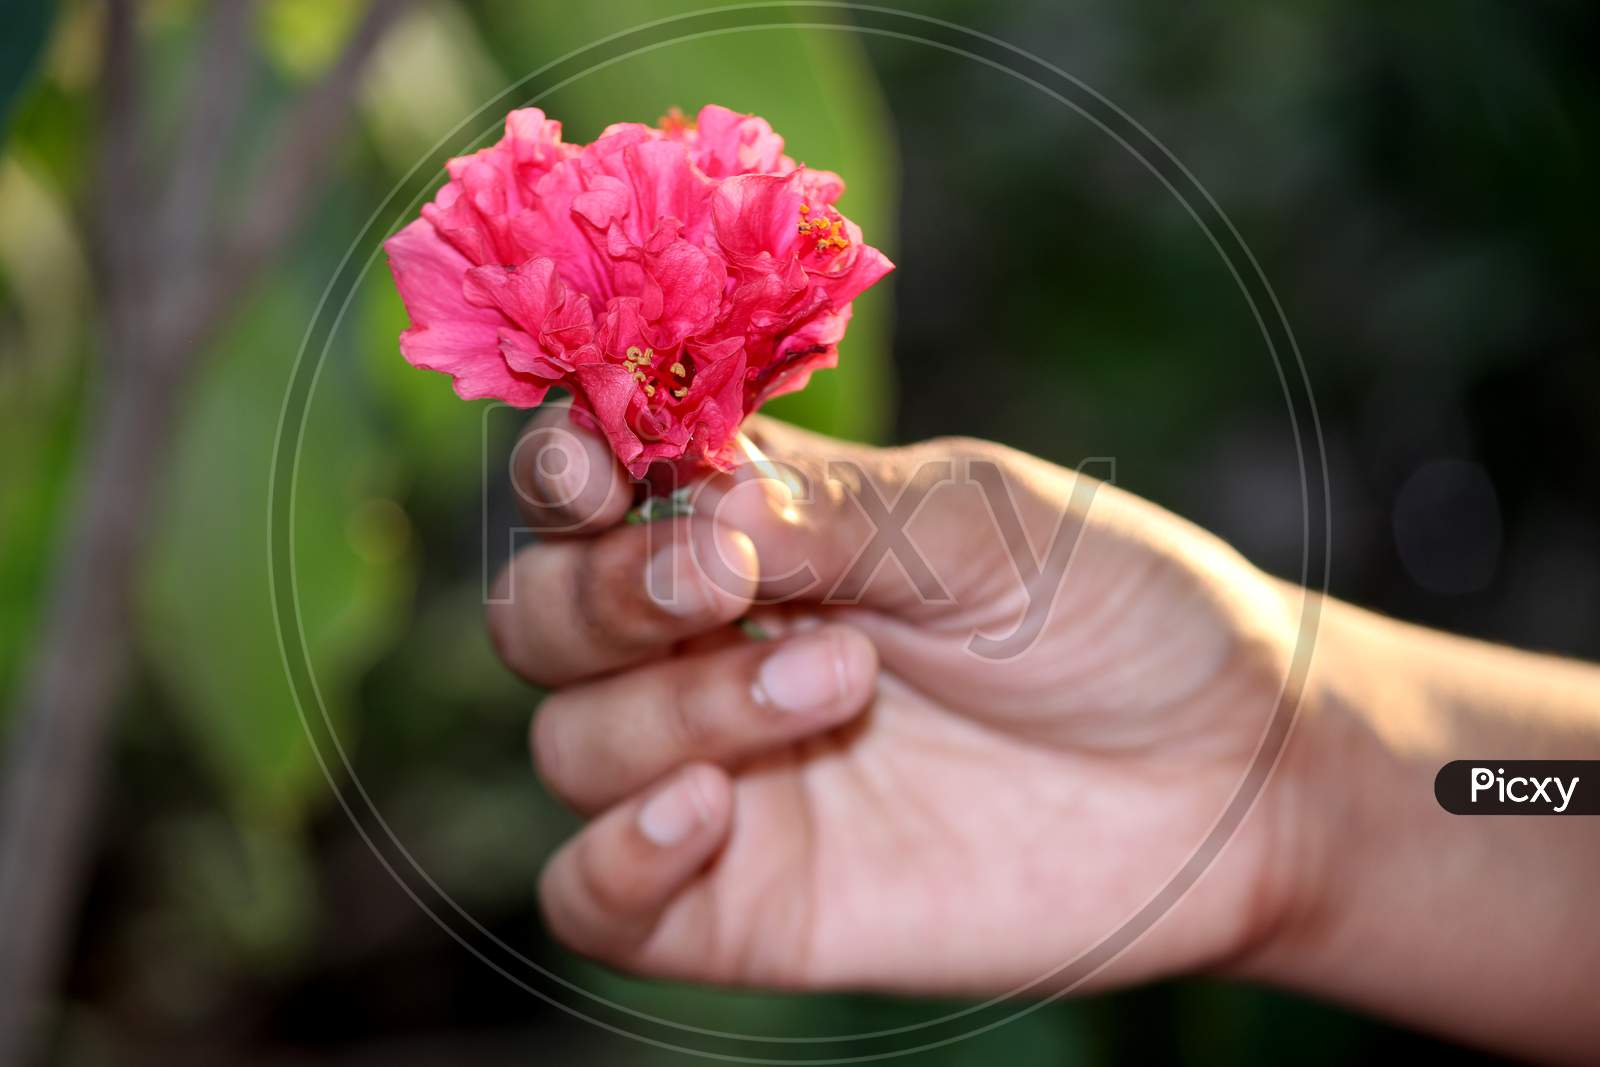 Holding Pink Flowers In Hand For Someone Special